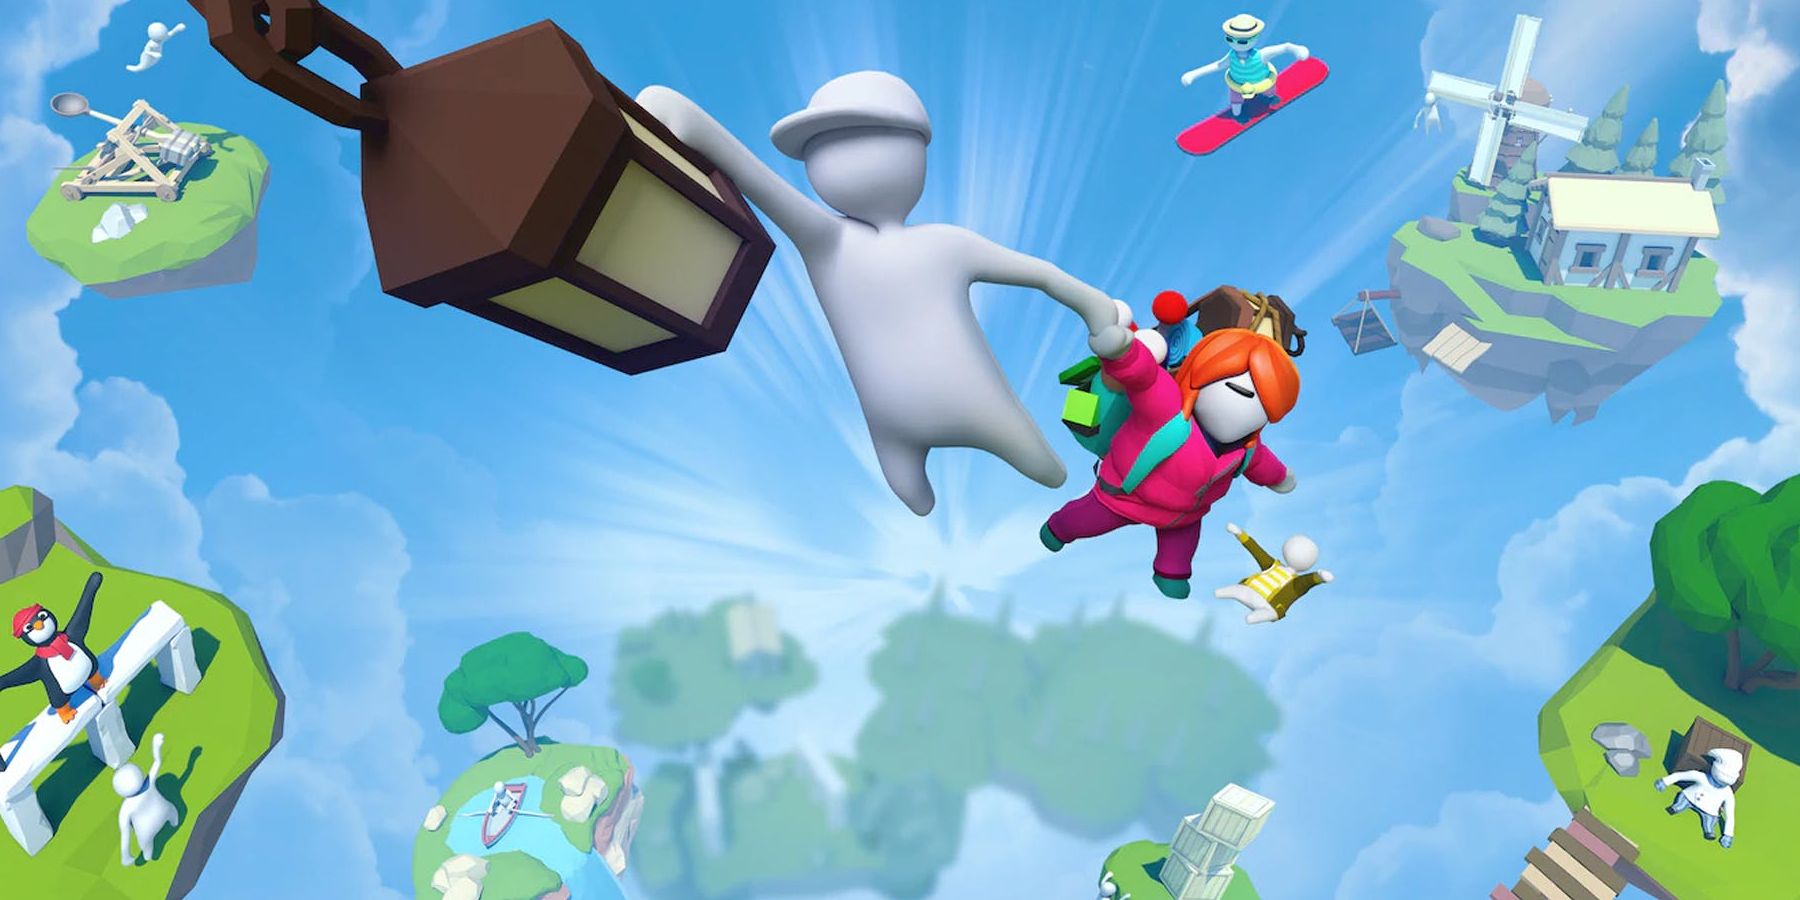 A player hangs onto another player, with another player falling to their doom, as he pulls into the air in Human: Fall Flat